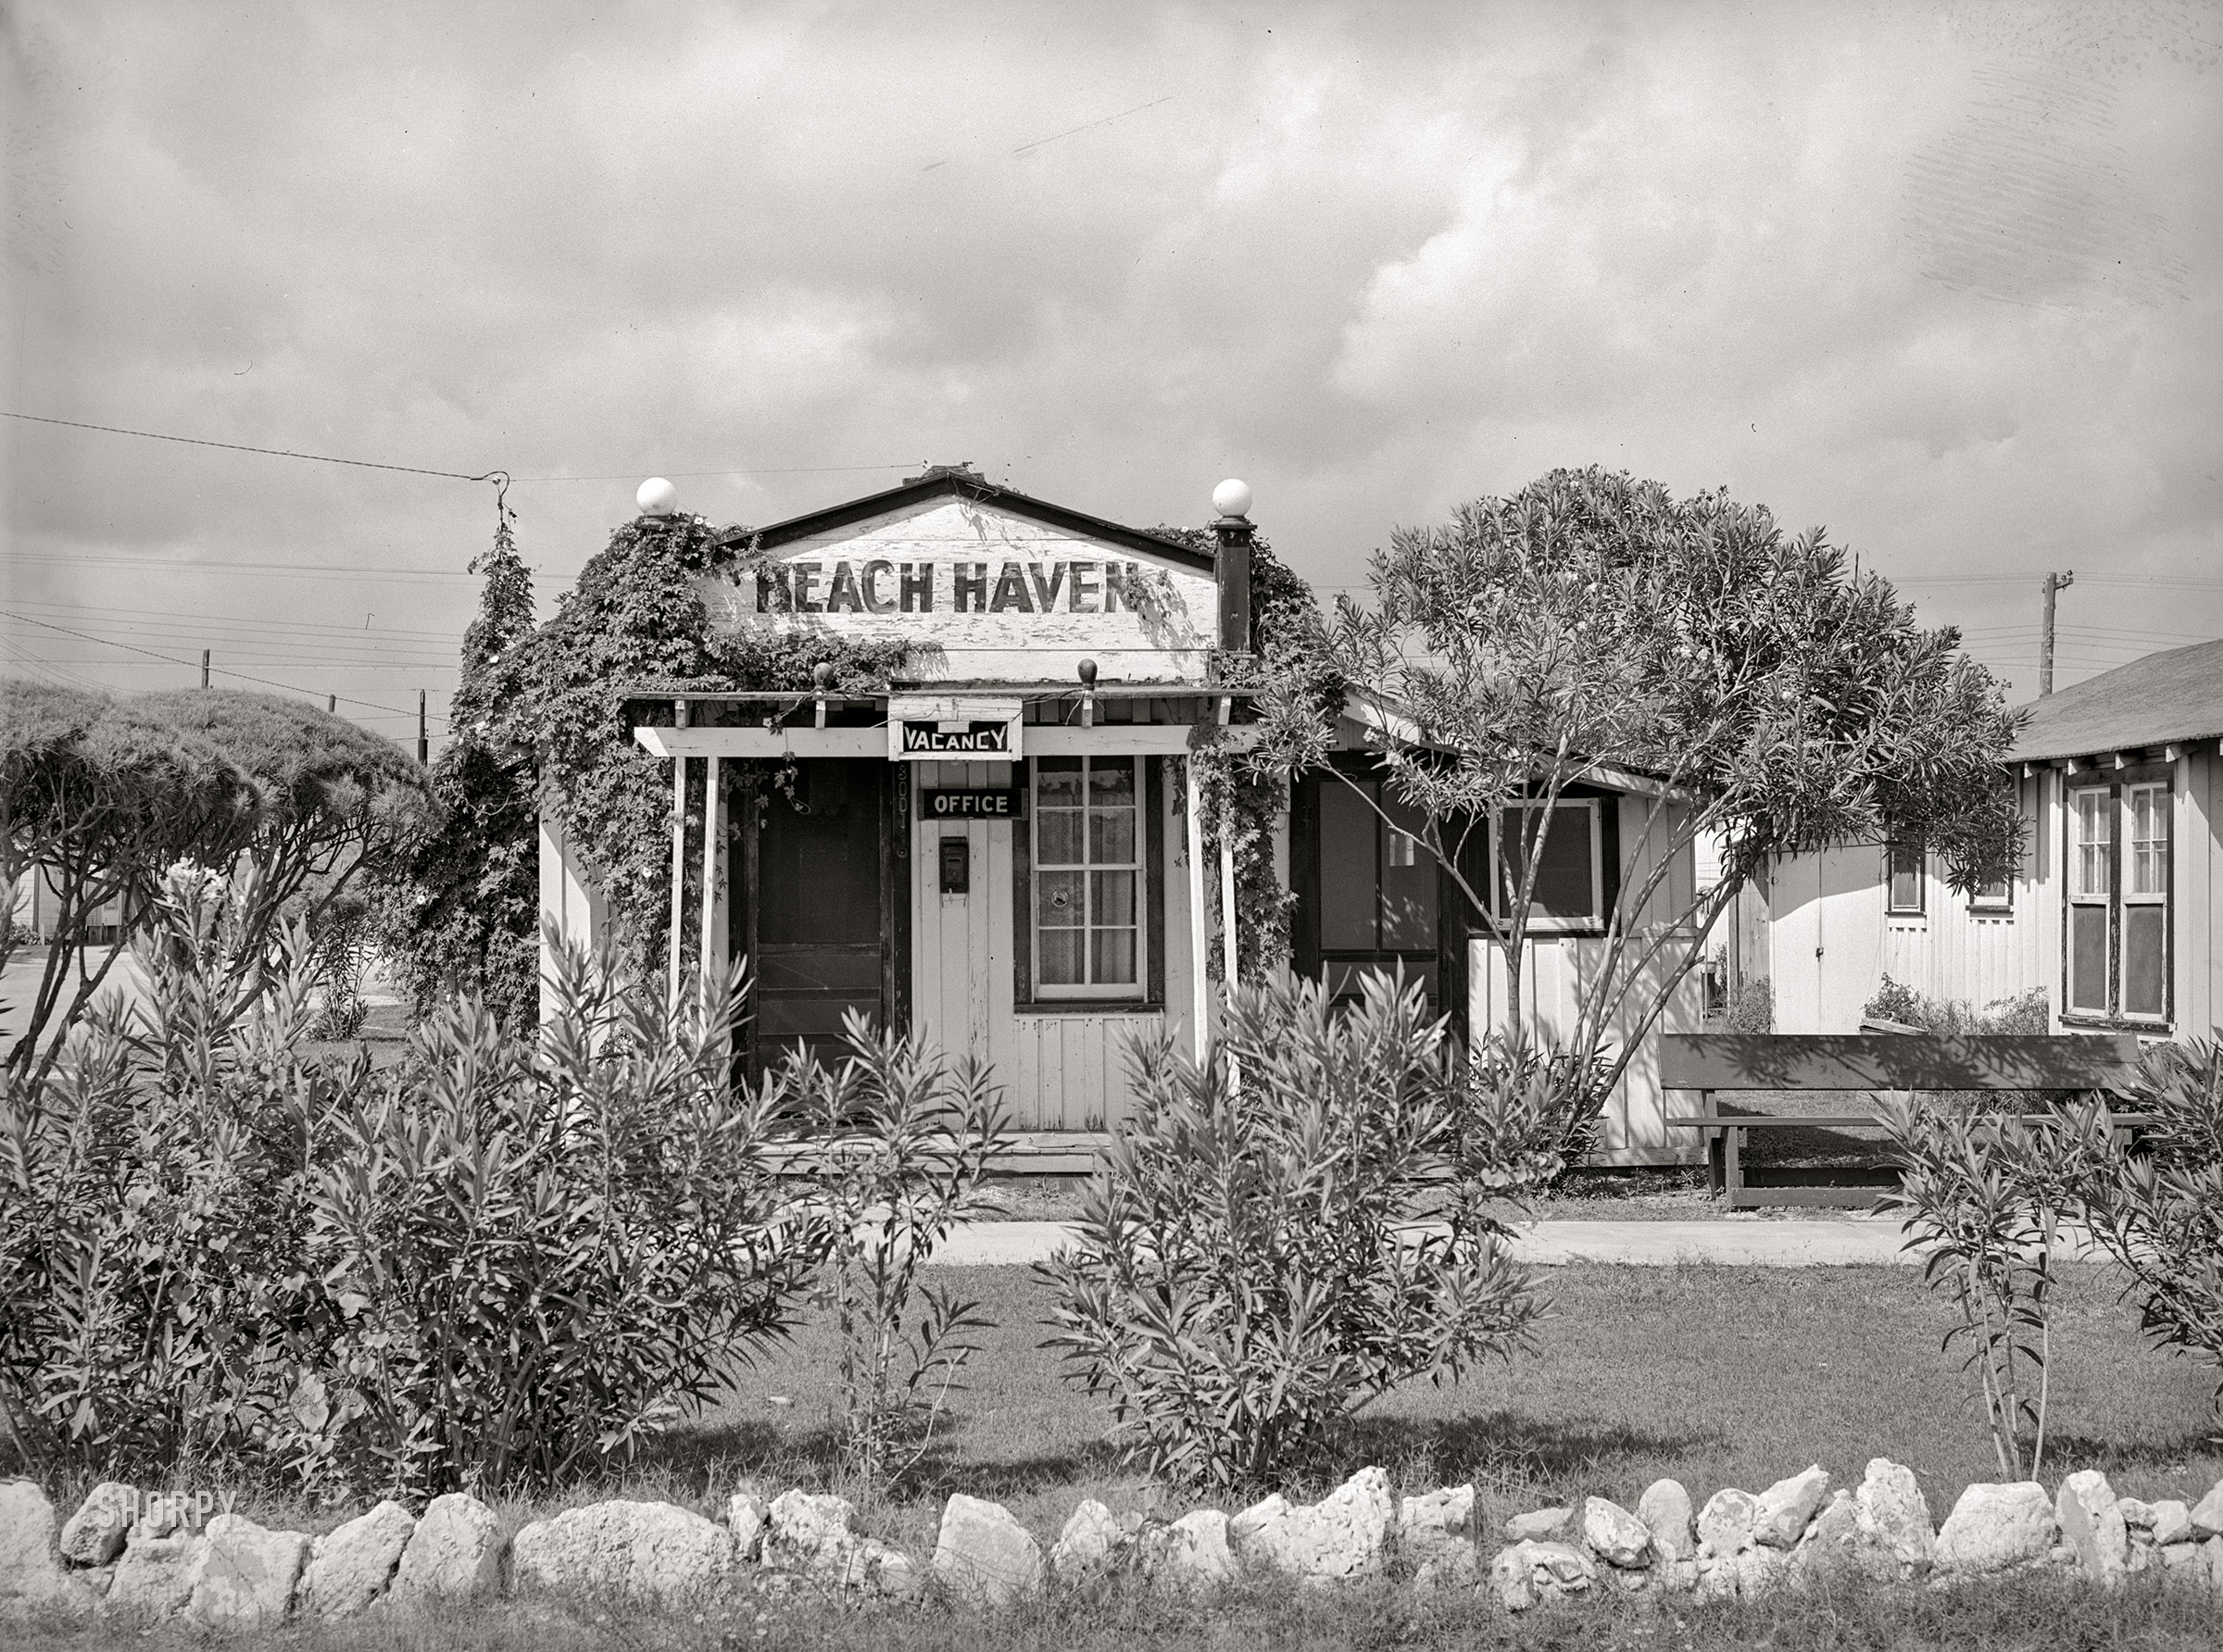 October 1939. "Corpus Christi, Texas. Boomtown areas around Naval Air Training Base. Office of tourist courts." Medium format acetate negative by Russell Lee. View full size.